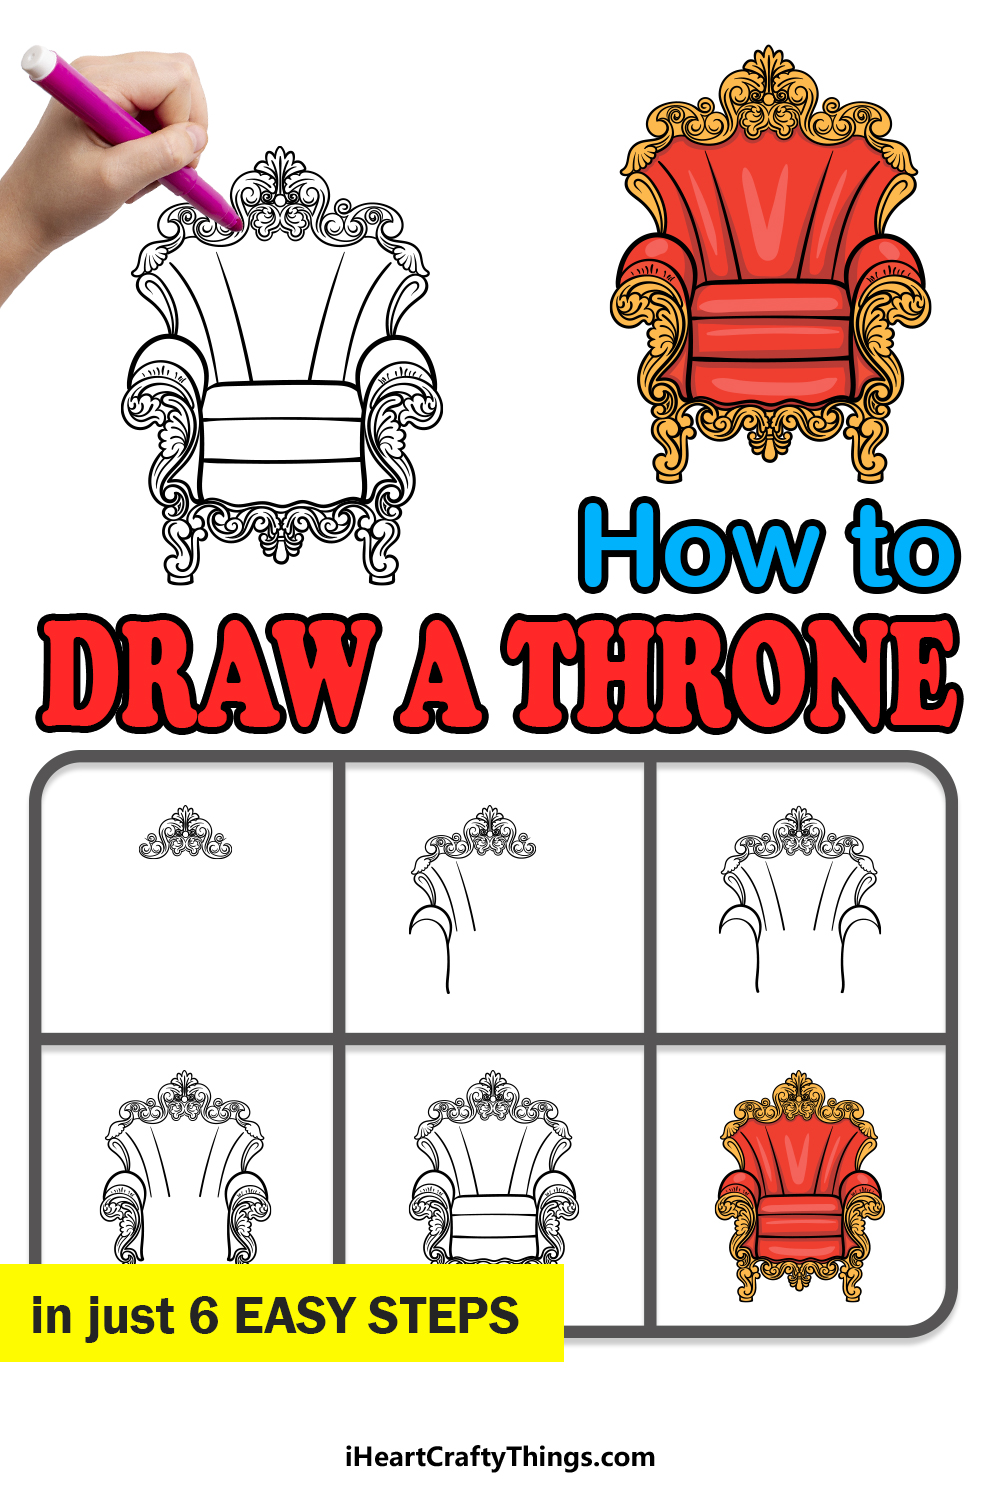 how to draw a Throne in 6 easy steps